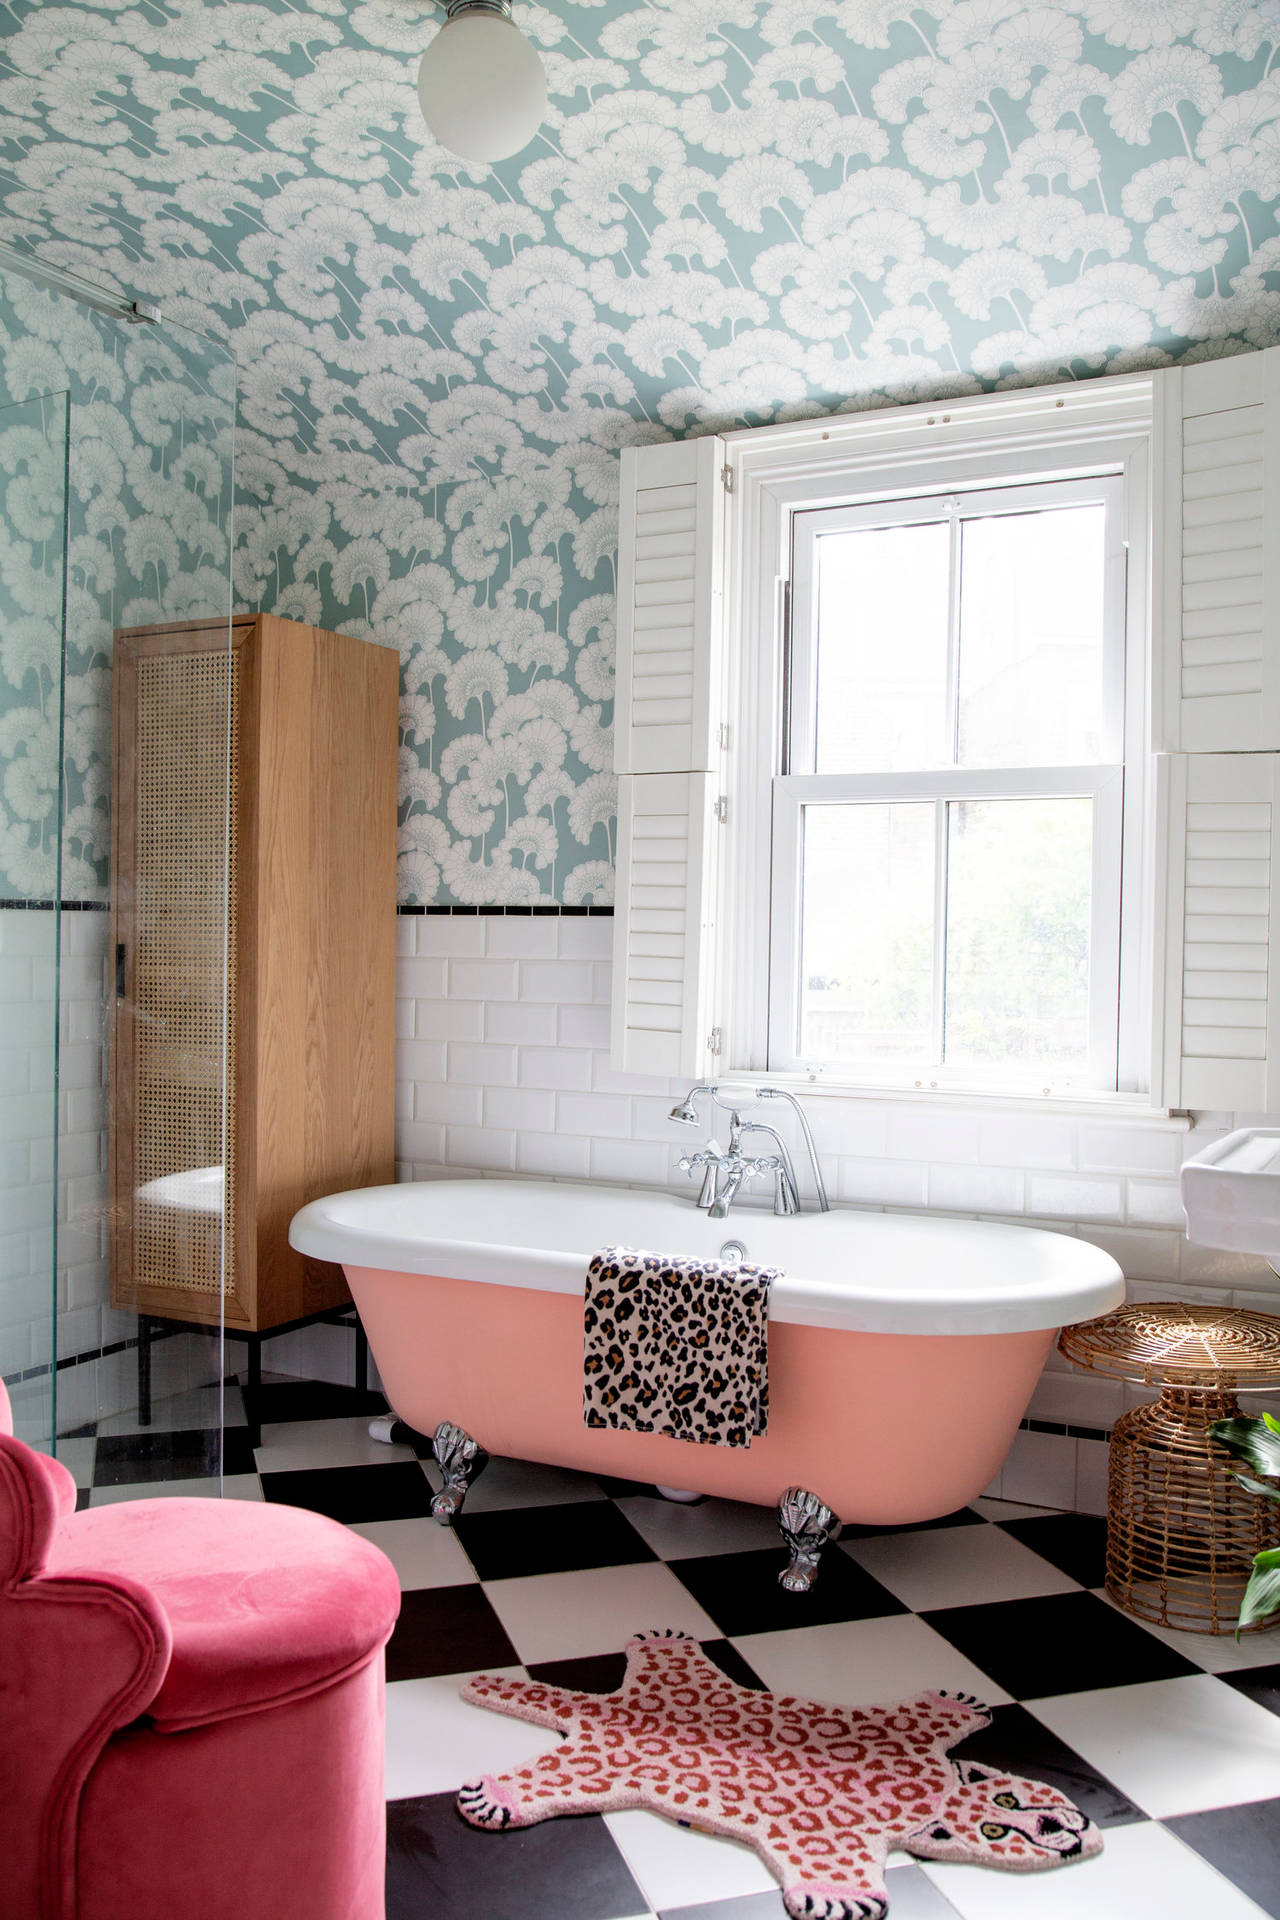 Captivating Pink Bathroom with Classic White Bathtub Wallpaper